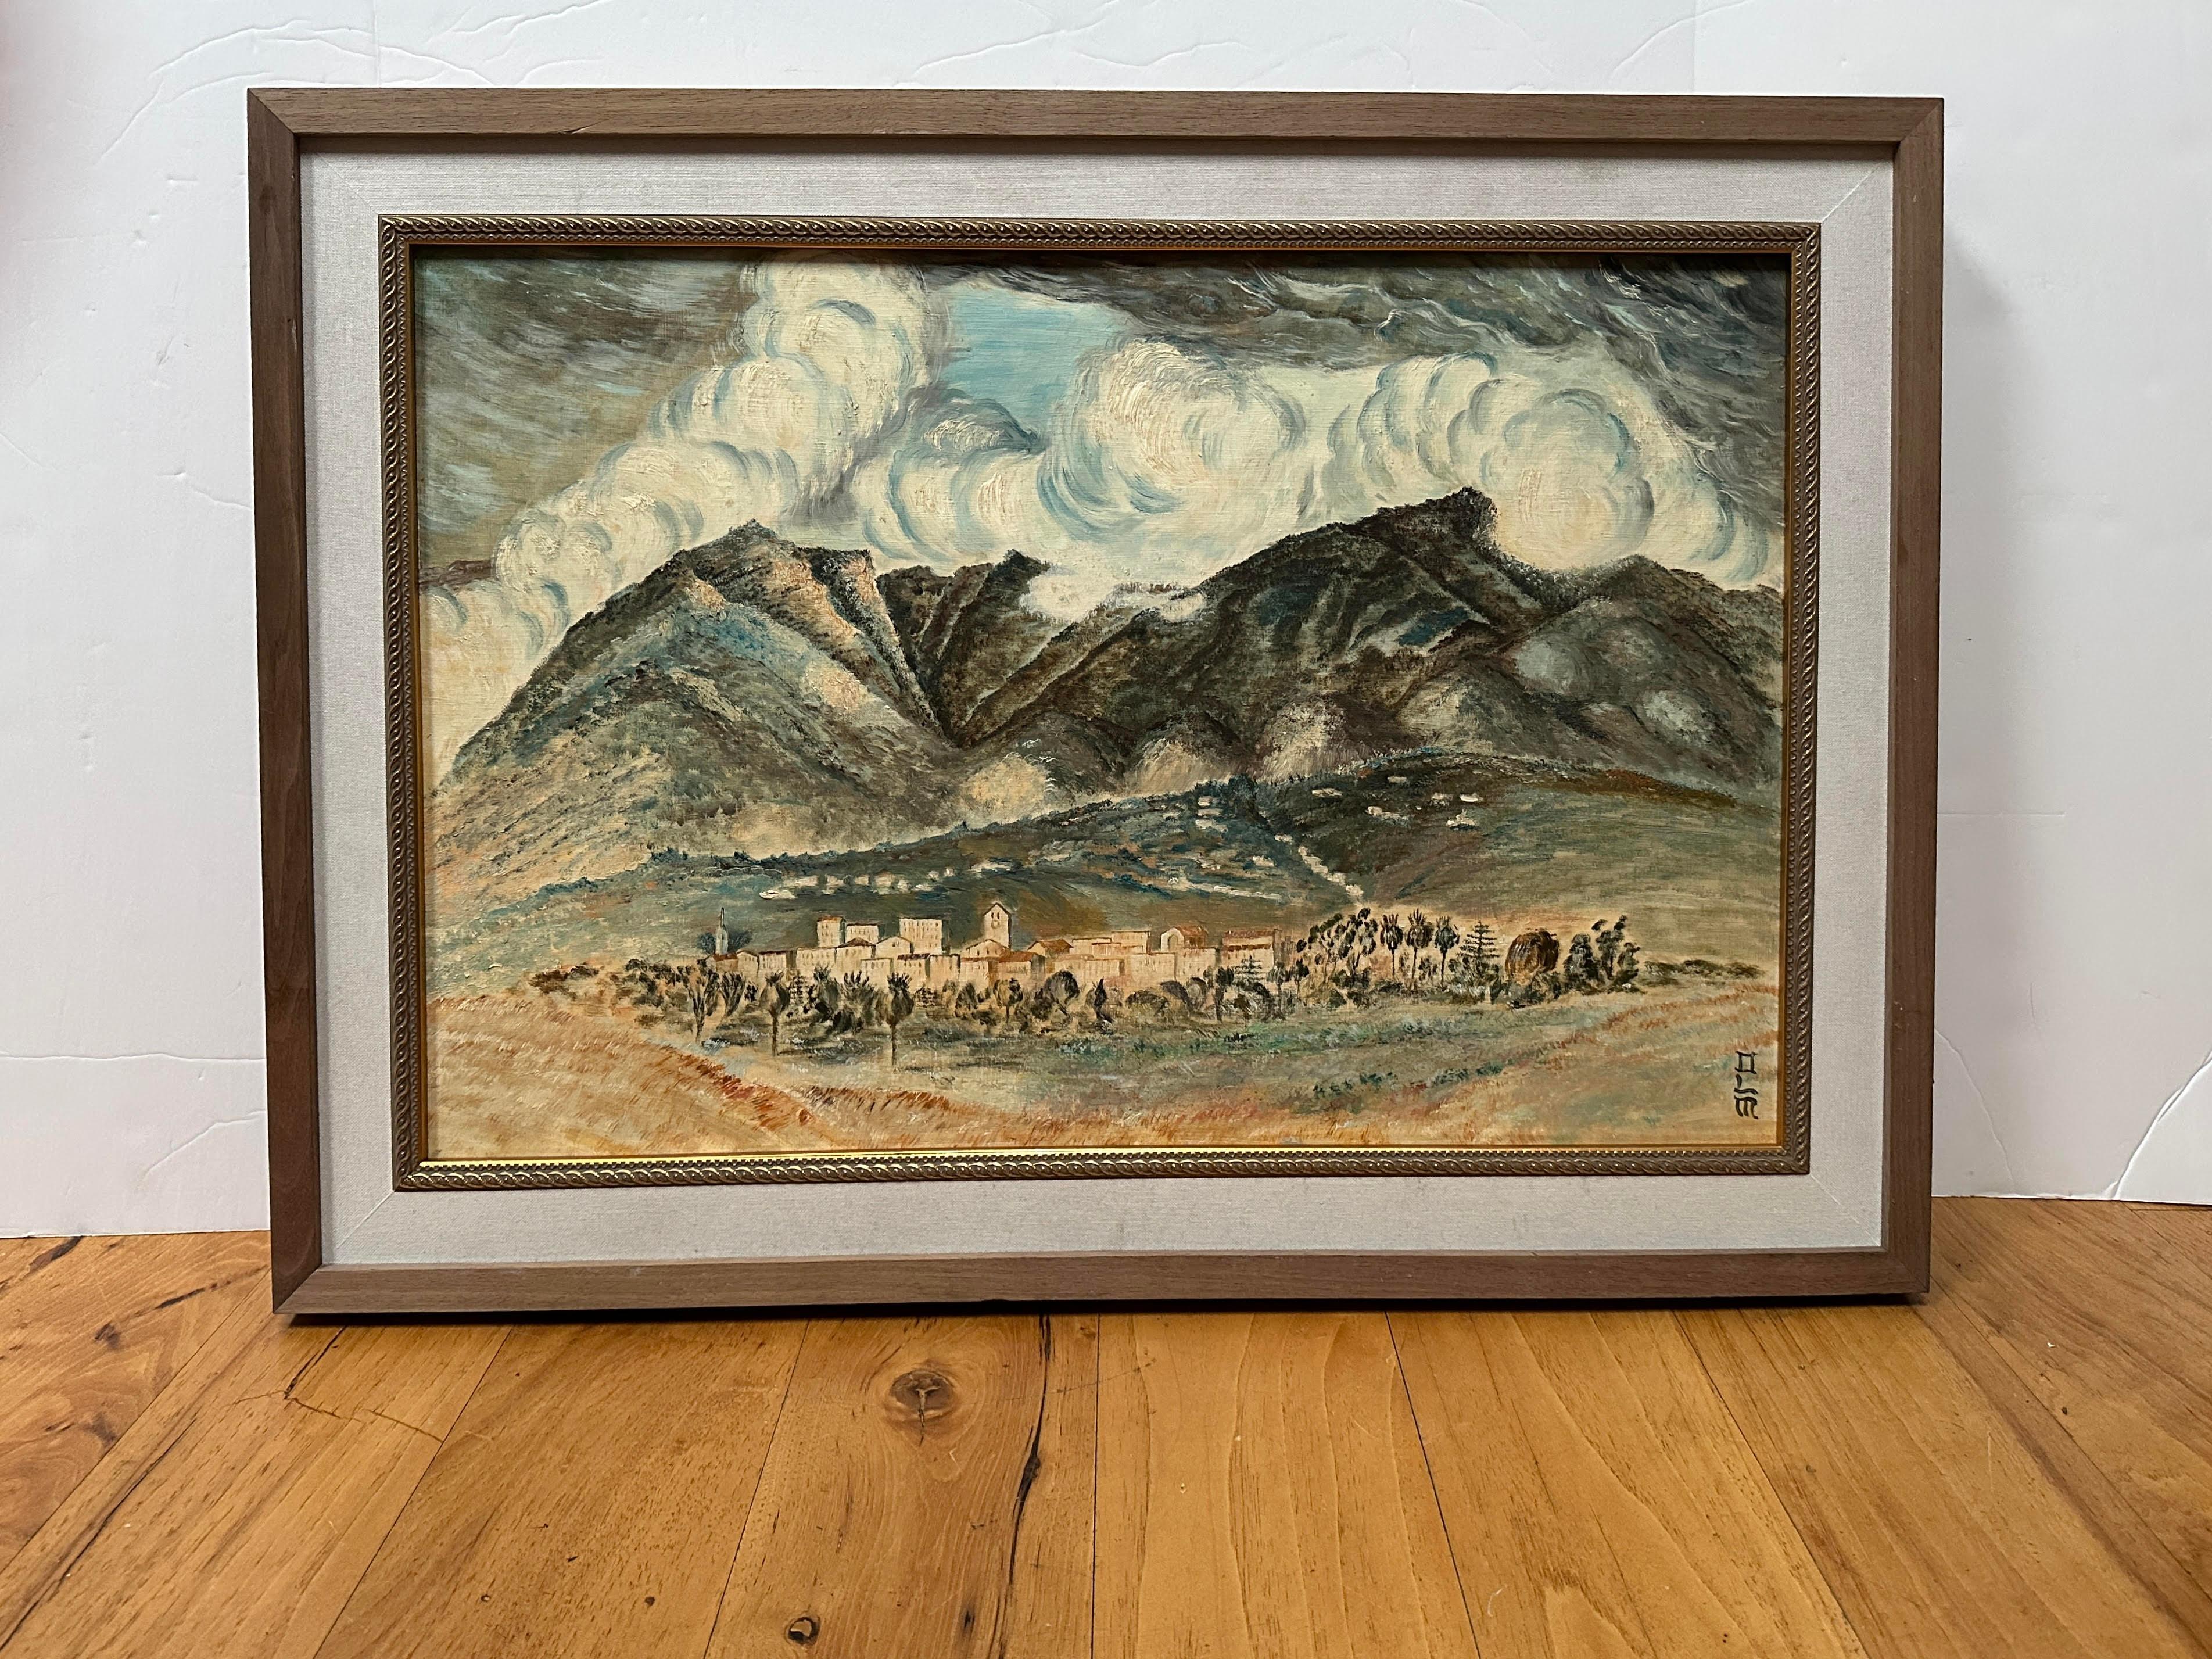 This Mid-Century oil painting depicts, mountains, voluminous clouds and a small village. The mountains and clouds have a foreboding energy about them and the Italian feeling village in a grove of trees feels small in comparison. The cool colors in